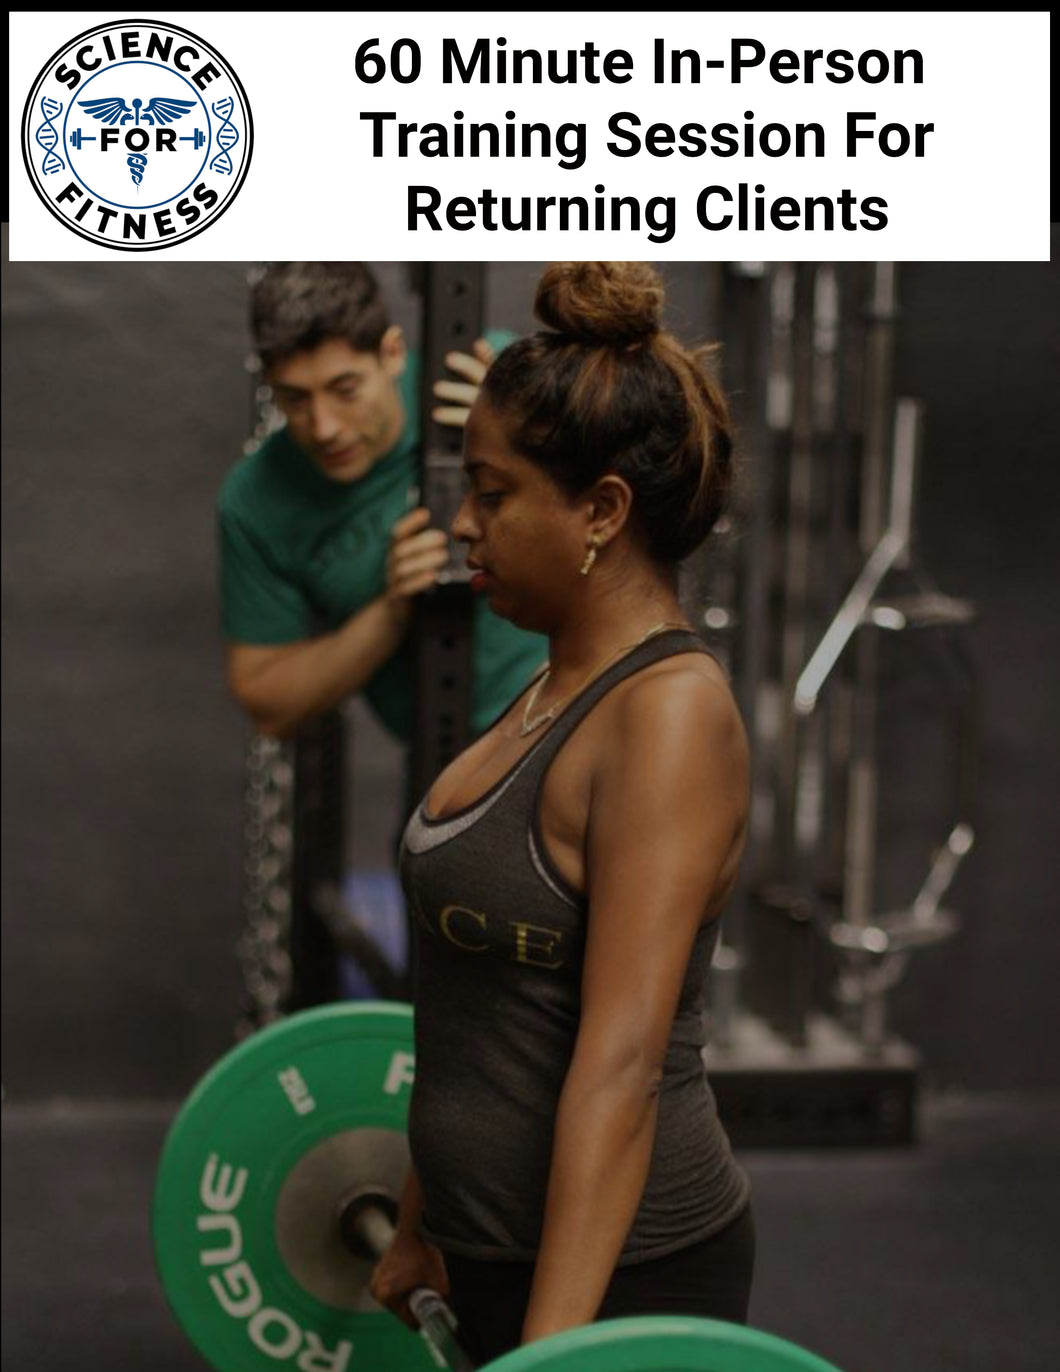 60 Min In-Person Training Session For Returning Clients